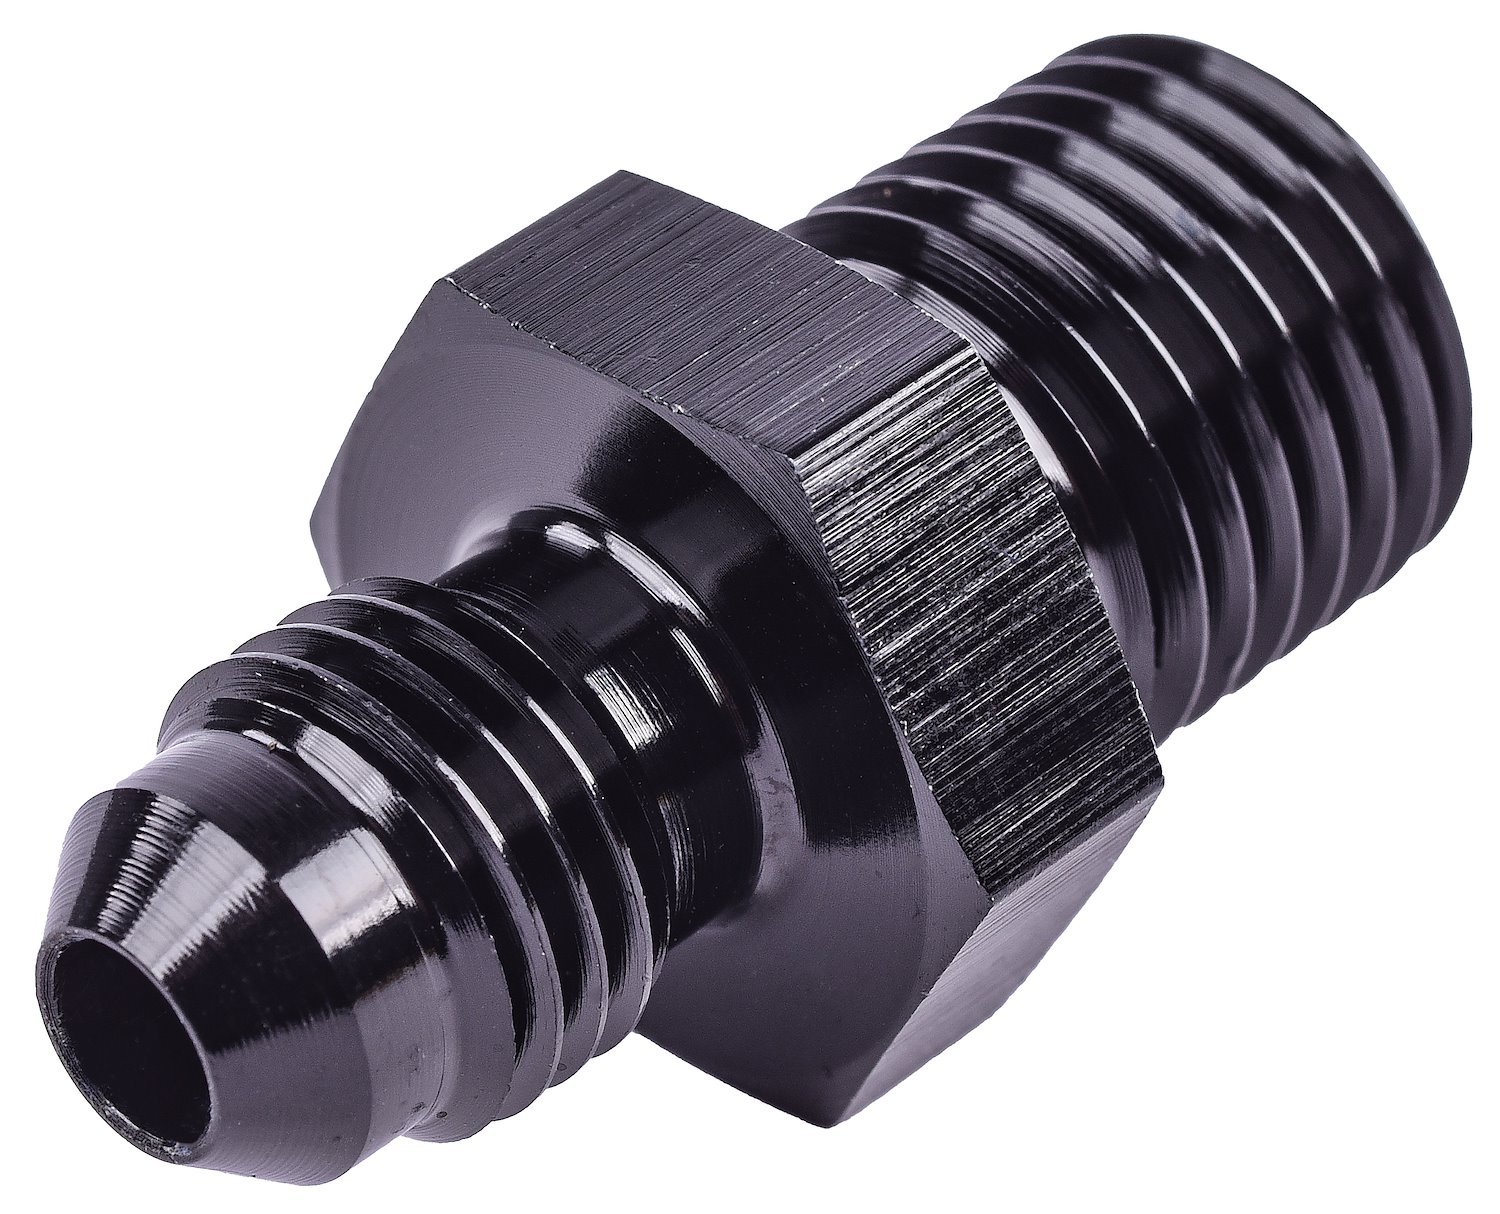 AN to Metric Adapter Fitting [-4 AN Male to 14mm x 1.5 Male, Black]